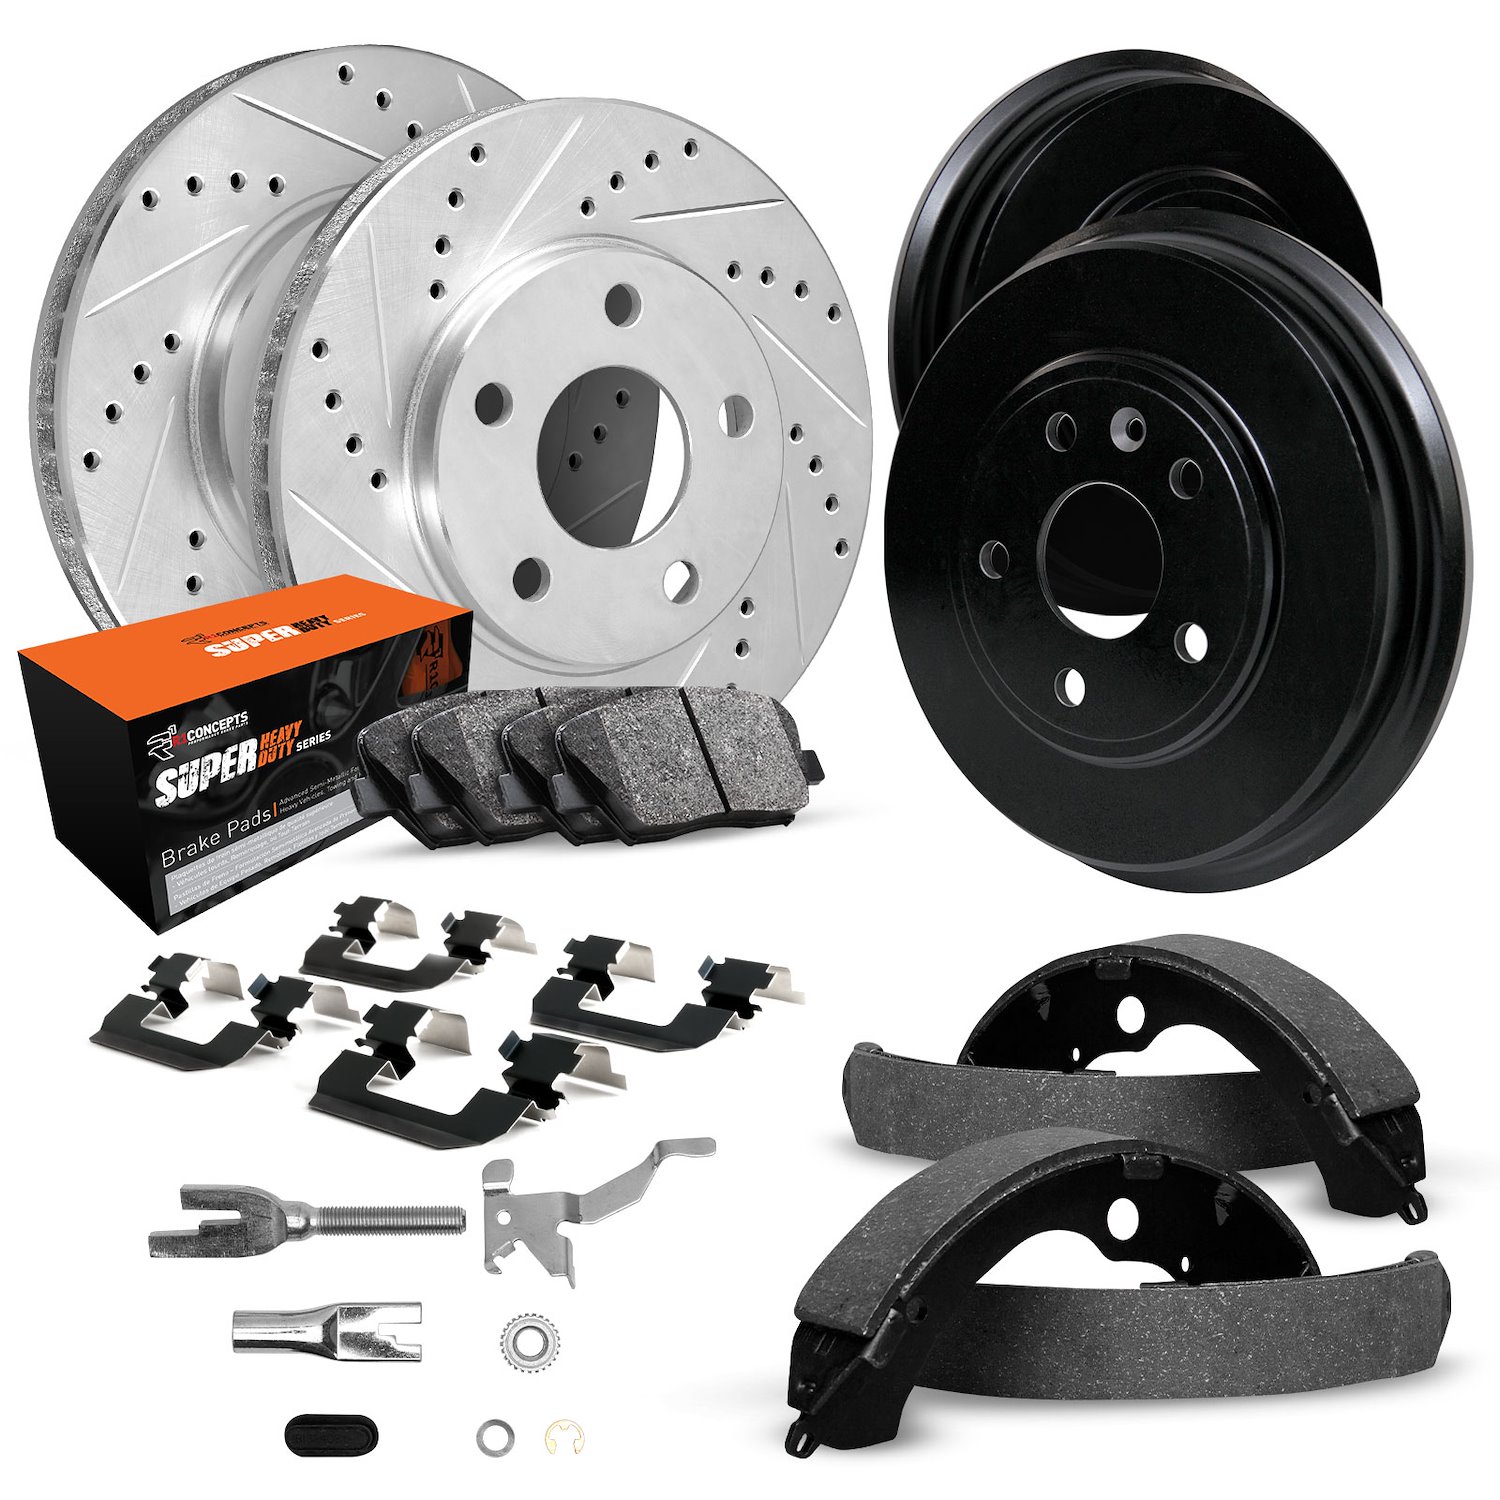 E-Line Drilled/Slotted Silver Rotor & Drum Set w/Super-Duty Pads, Shoes/Hardware/Adjusters, 2007-2007 GM